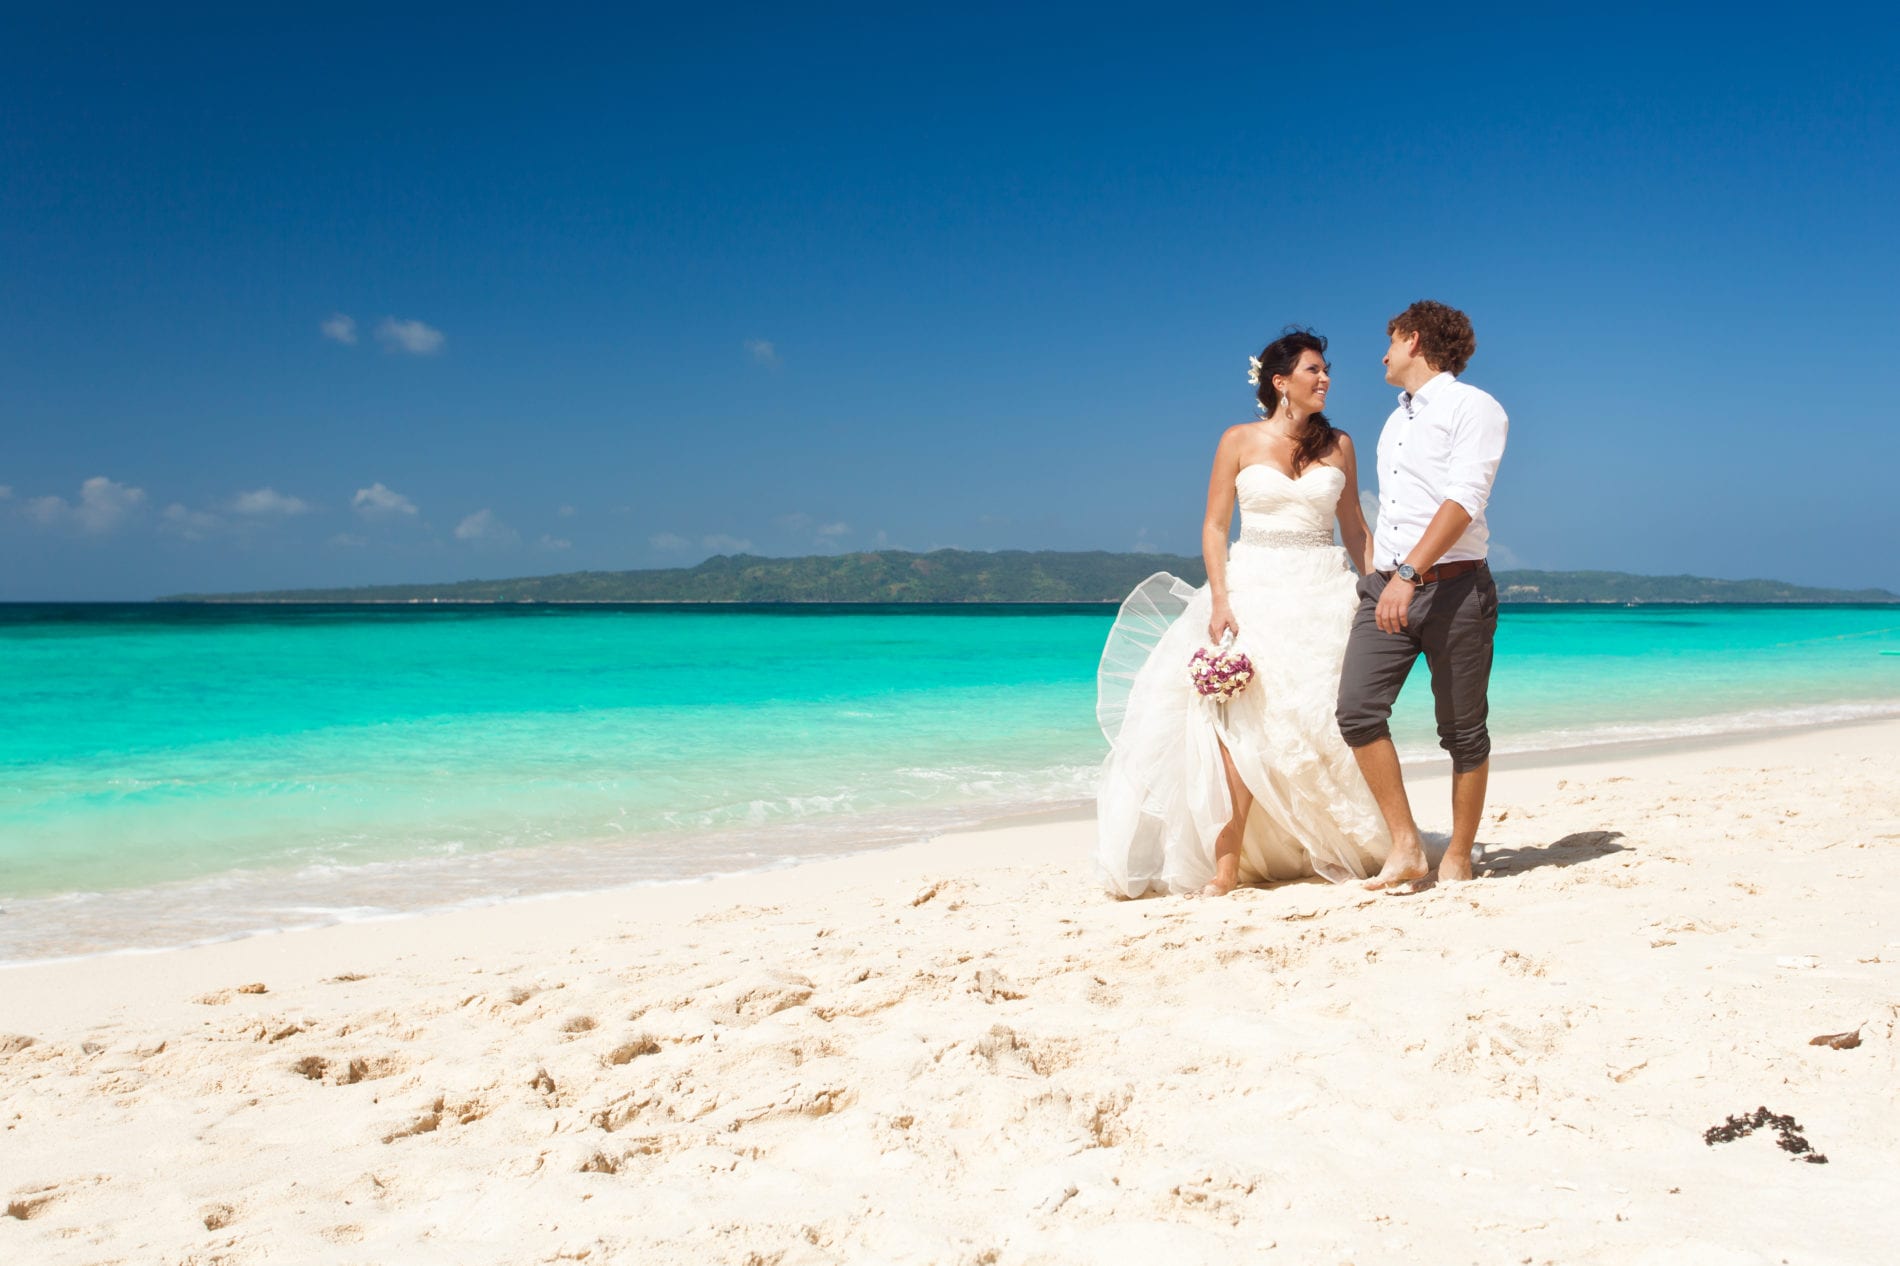 Weddings abroad - on the beach in the Caribbean